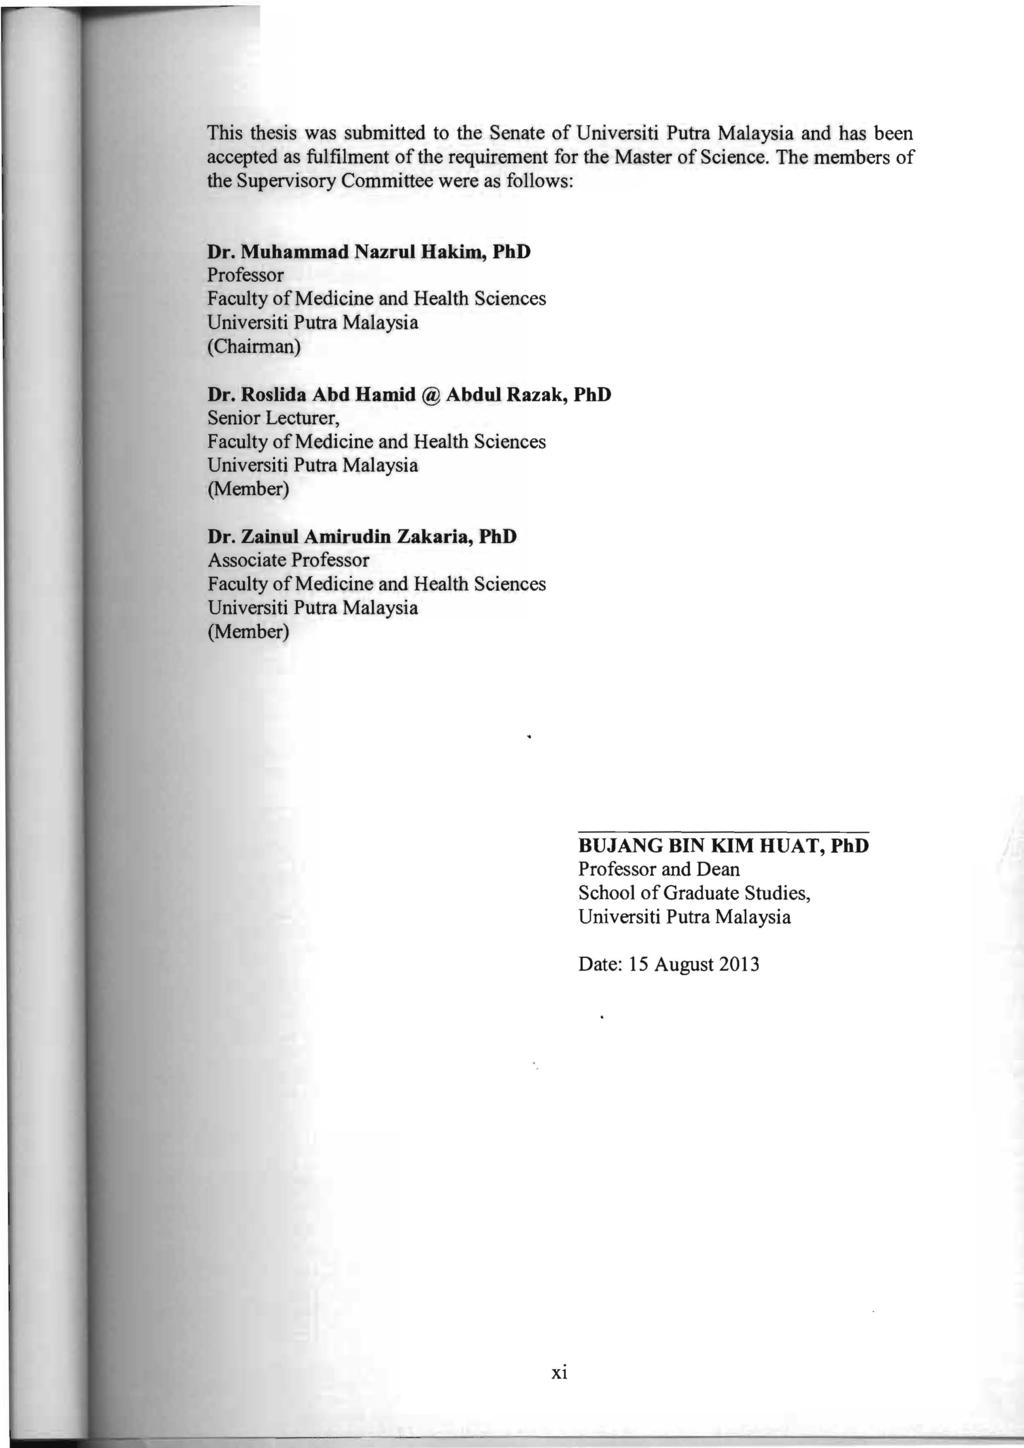 This thesis was submitted to the Senate of Universiti Putra Malaysia and has been accepted as fulfilment of the requirement for the Master of Science.